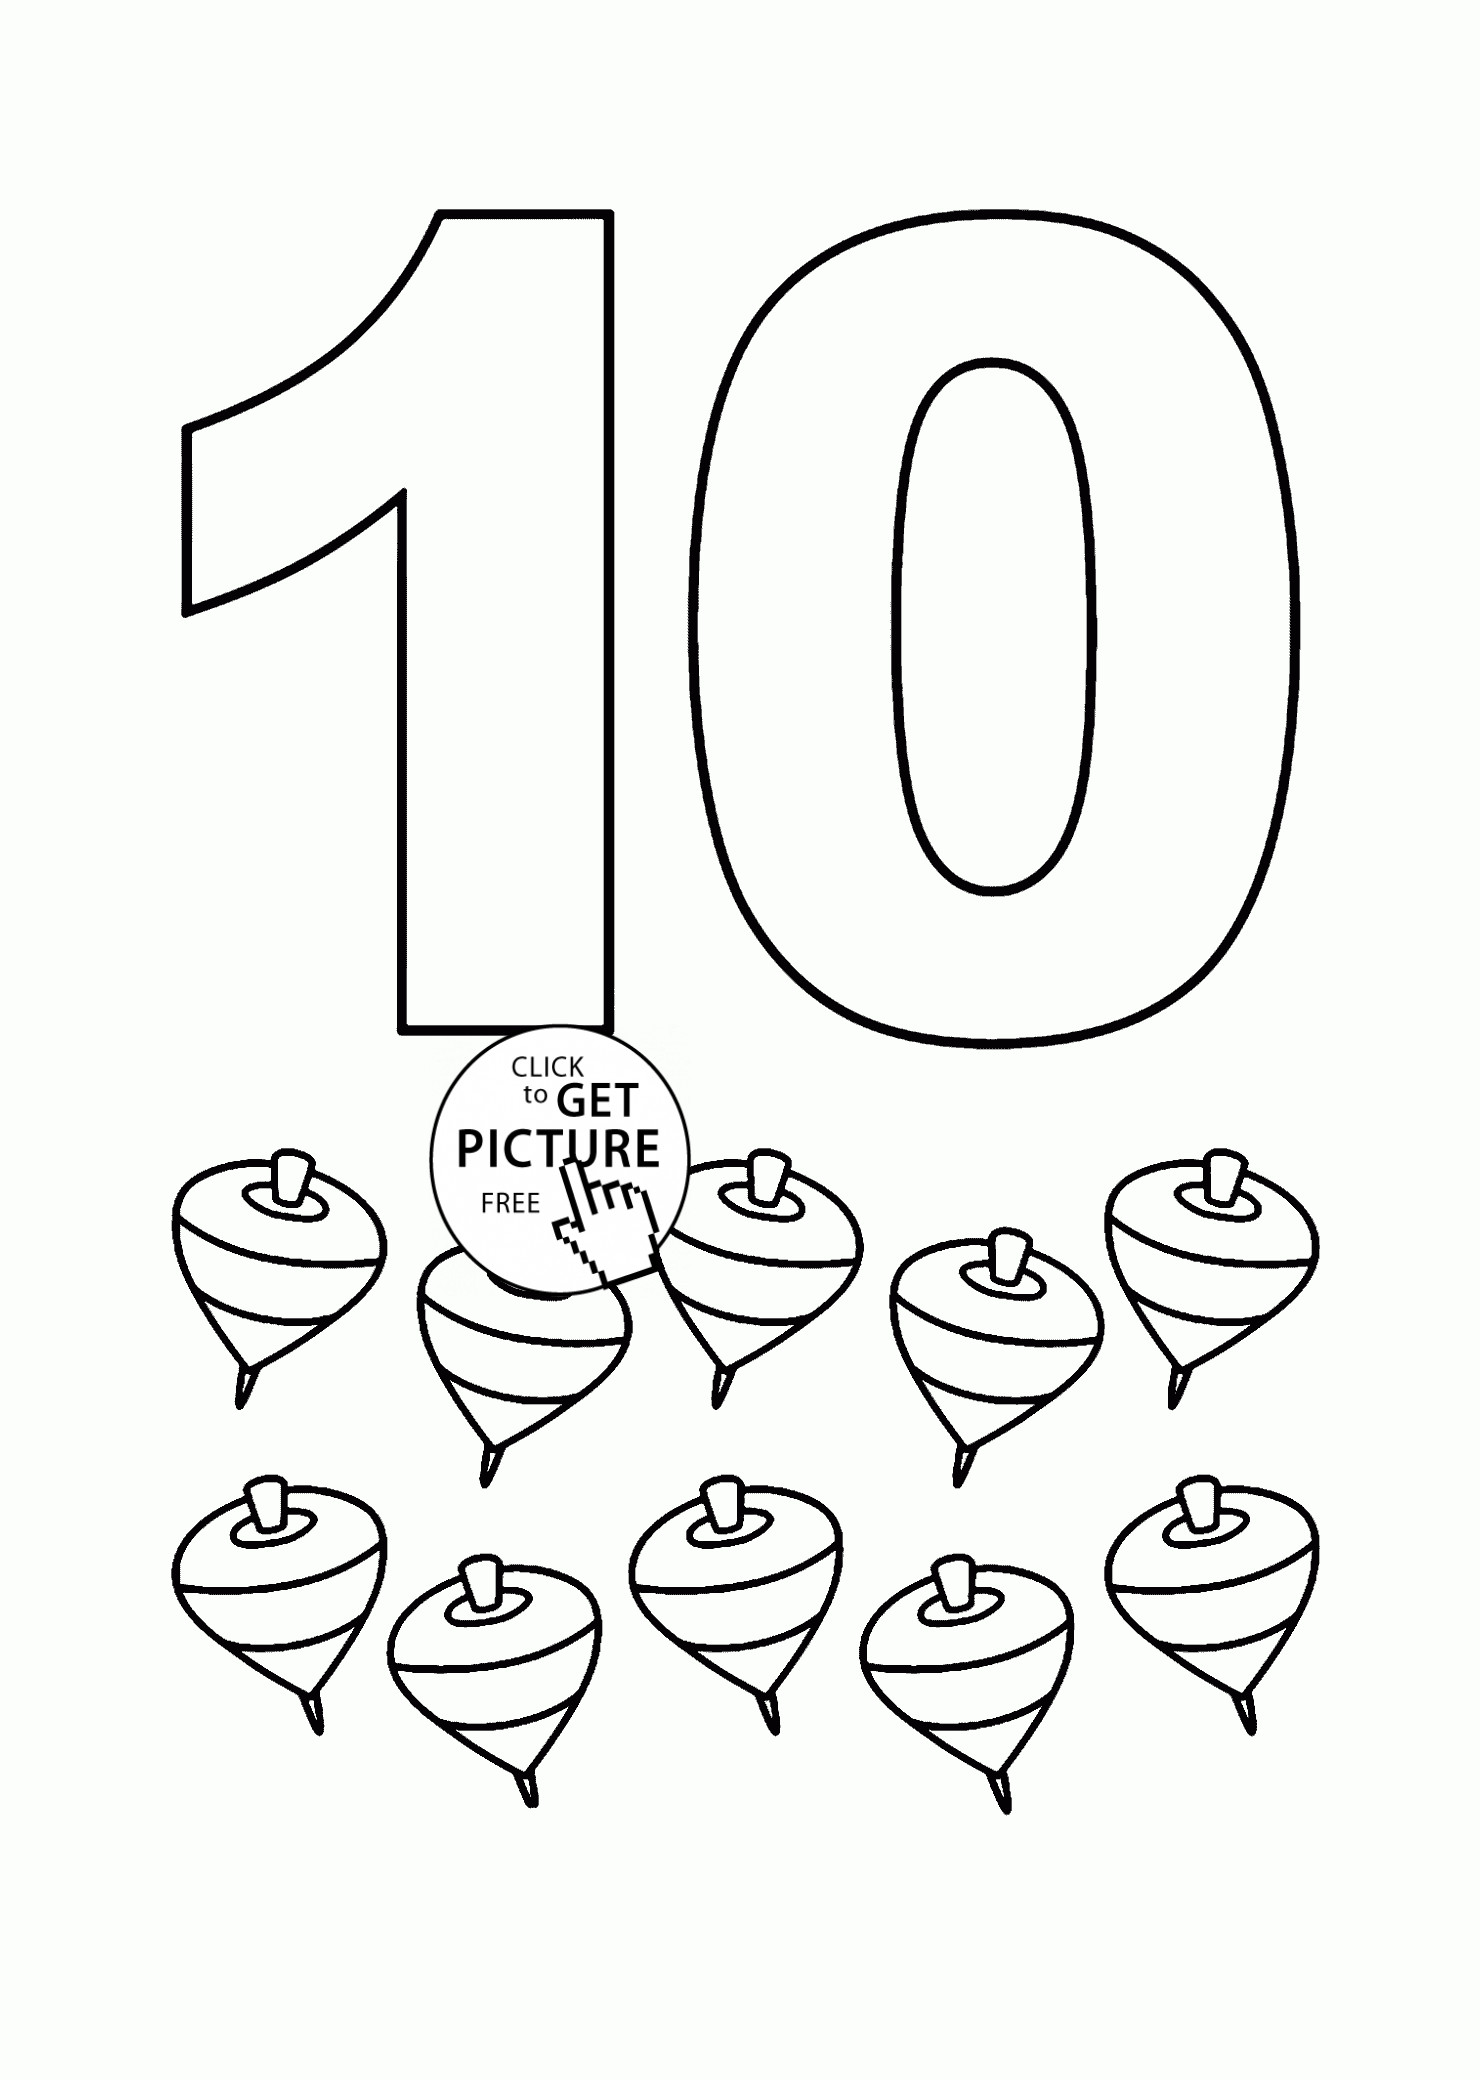 Coloring Sheets For Kids 10
 Number 10 coloring pages for kids counting sheets